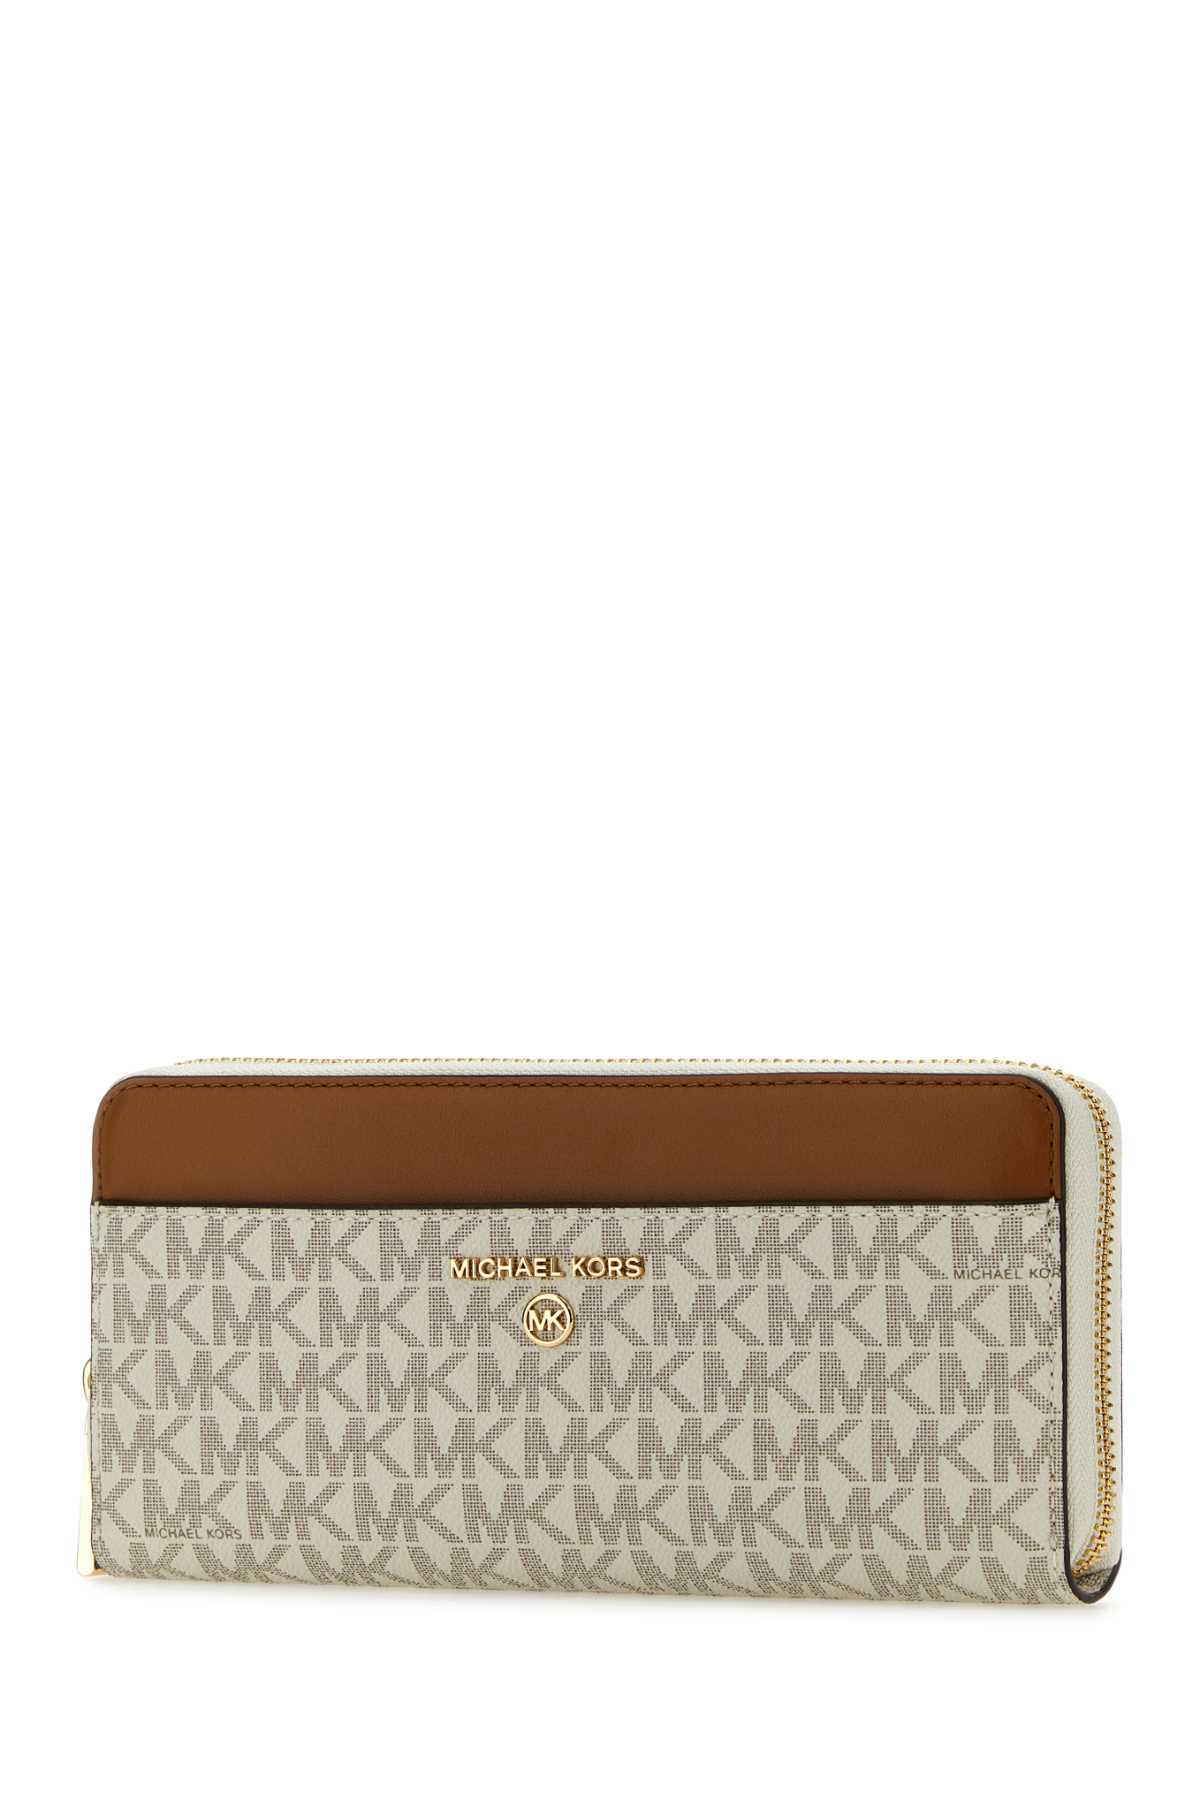 Michael Kors Printed Canvas Wallet In White